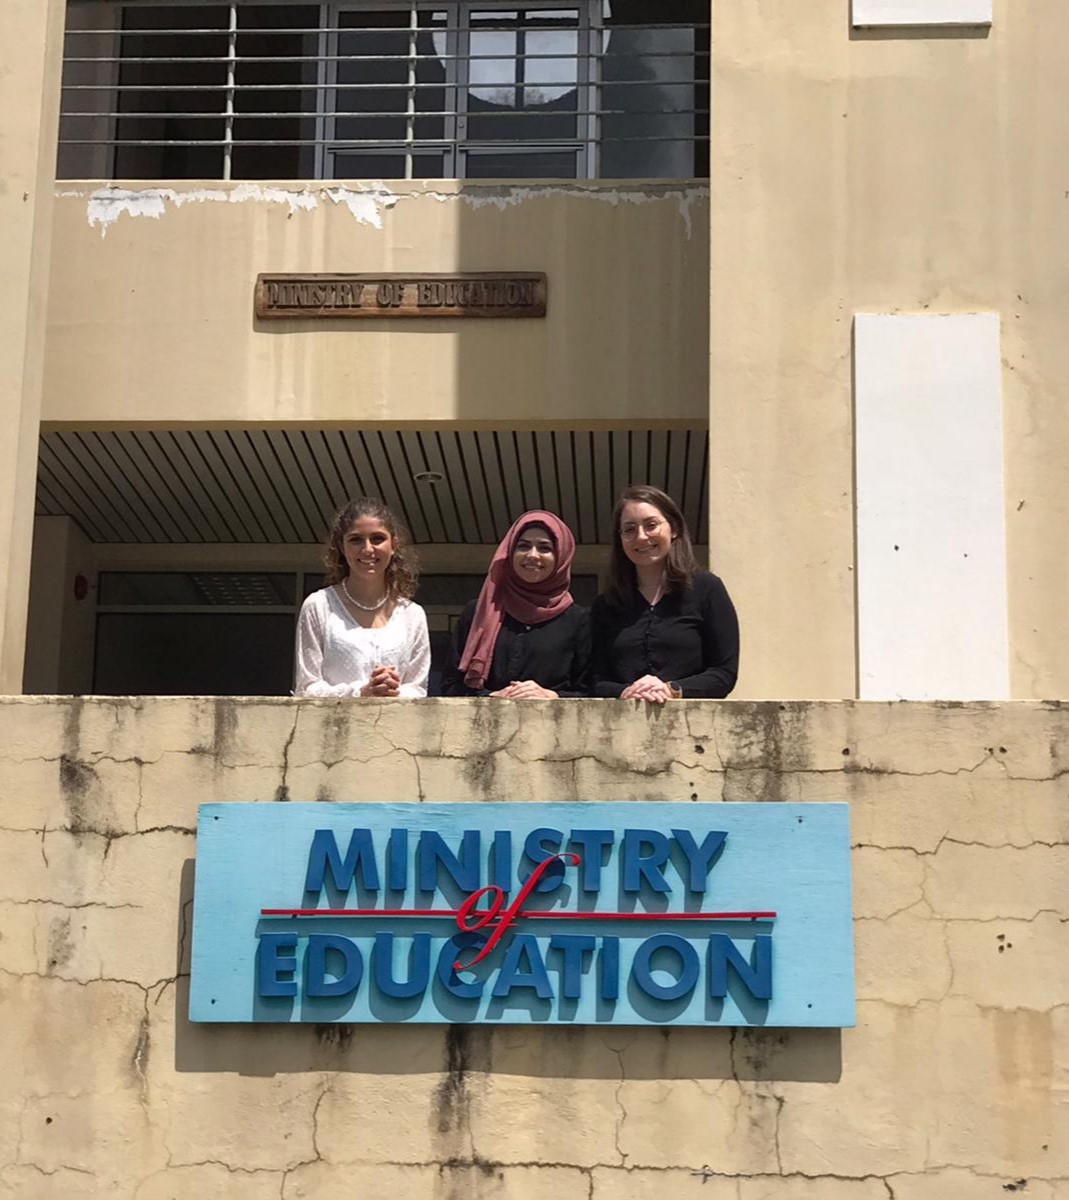 From left to right: Marlene Zahran, Souad Ali, and Muriel Bassil at the Ministry of Education